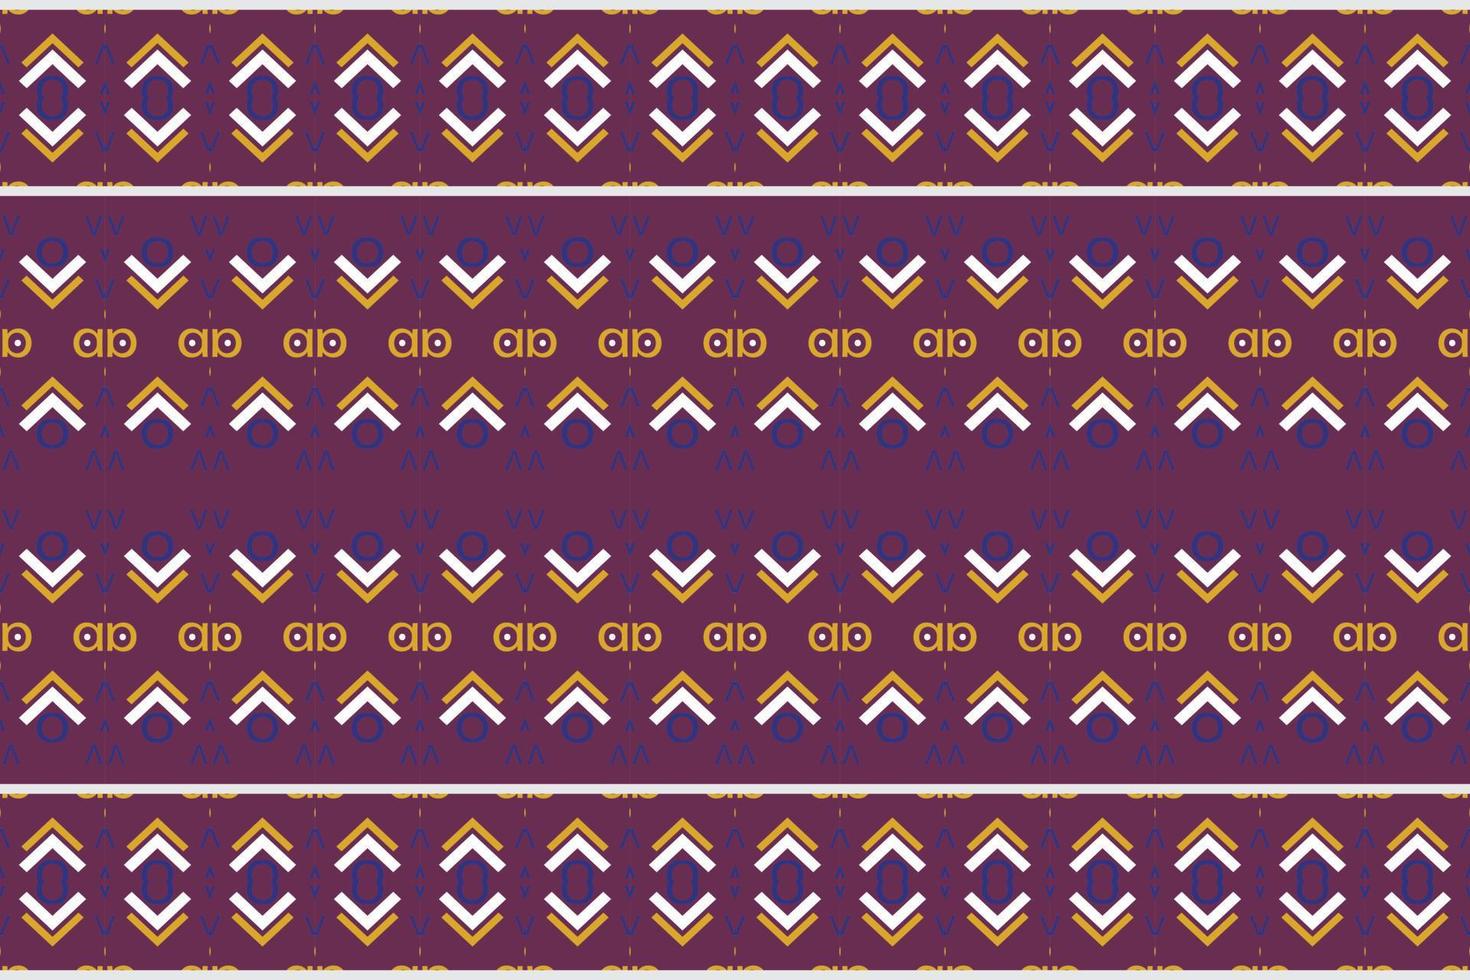 Ethnic pattern vector. Traditional ethnic patterns vectors It is a pattern geometric shapes. Create beautiful fabric patterns. Design for print. Using in the fashion industry.